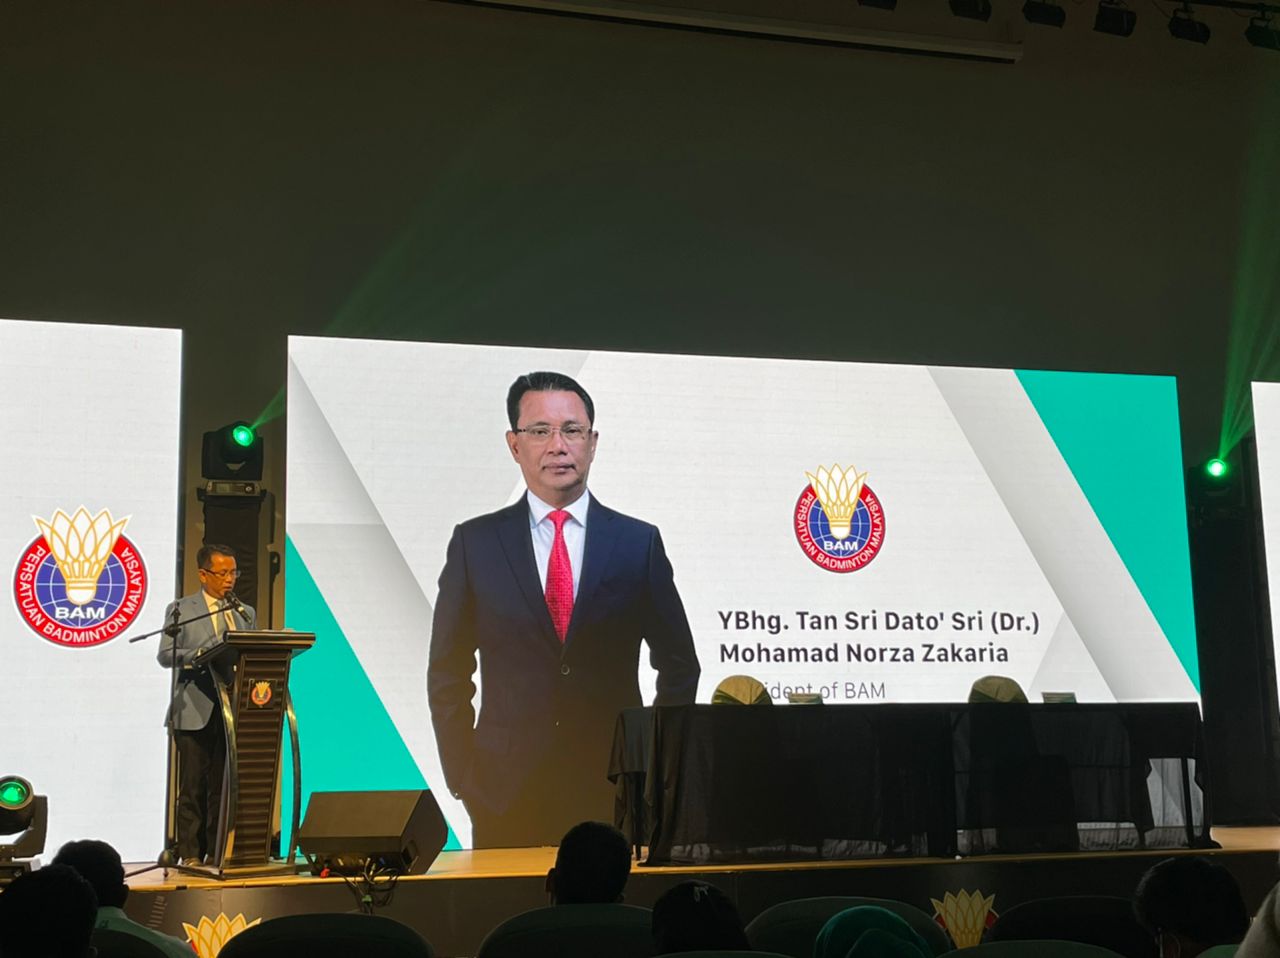 PETRONAS Signs ThreeYear Sponsorship Deal With BAM To Support National